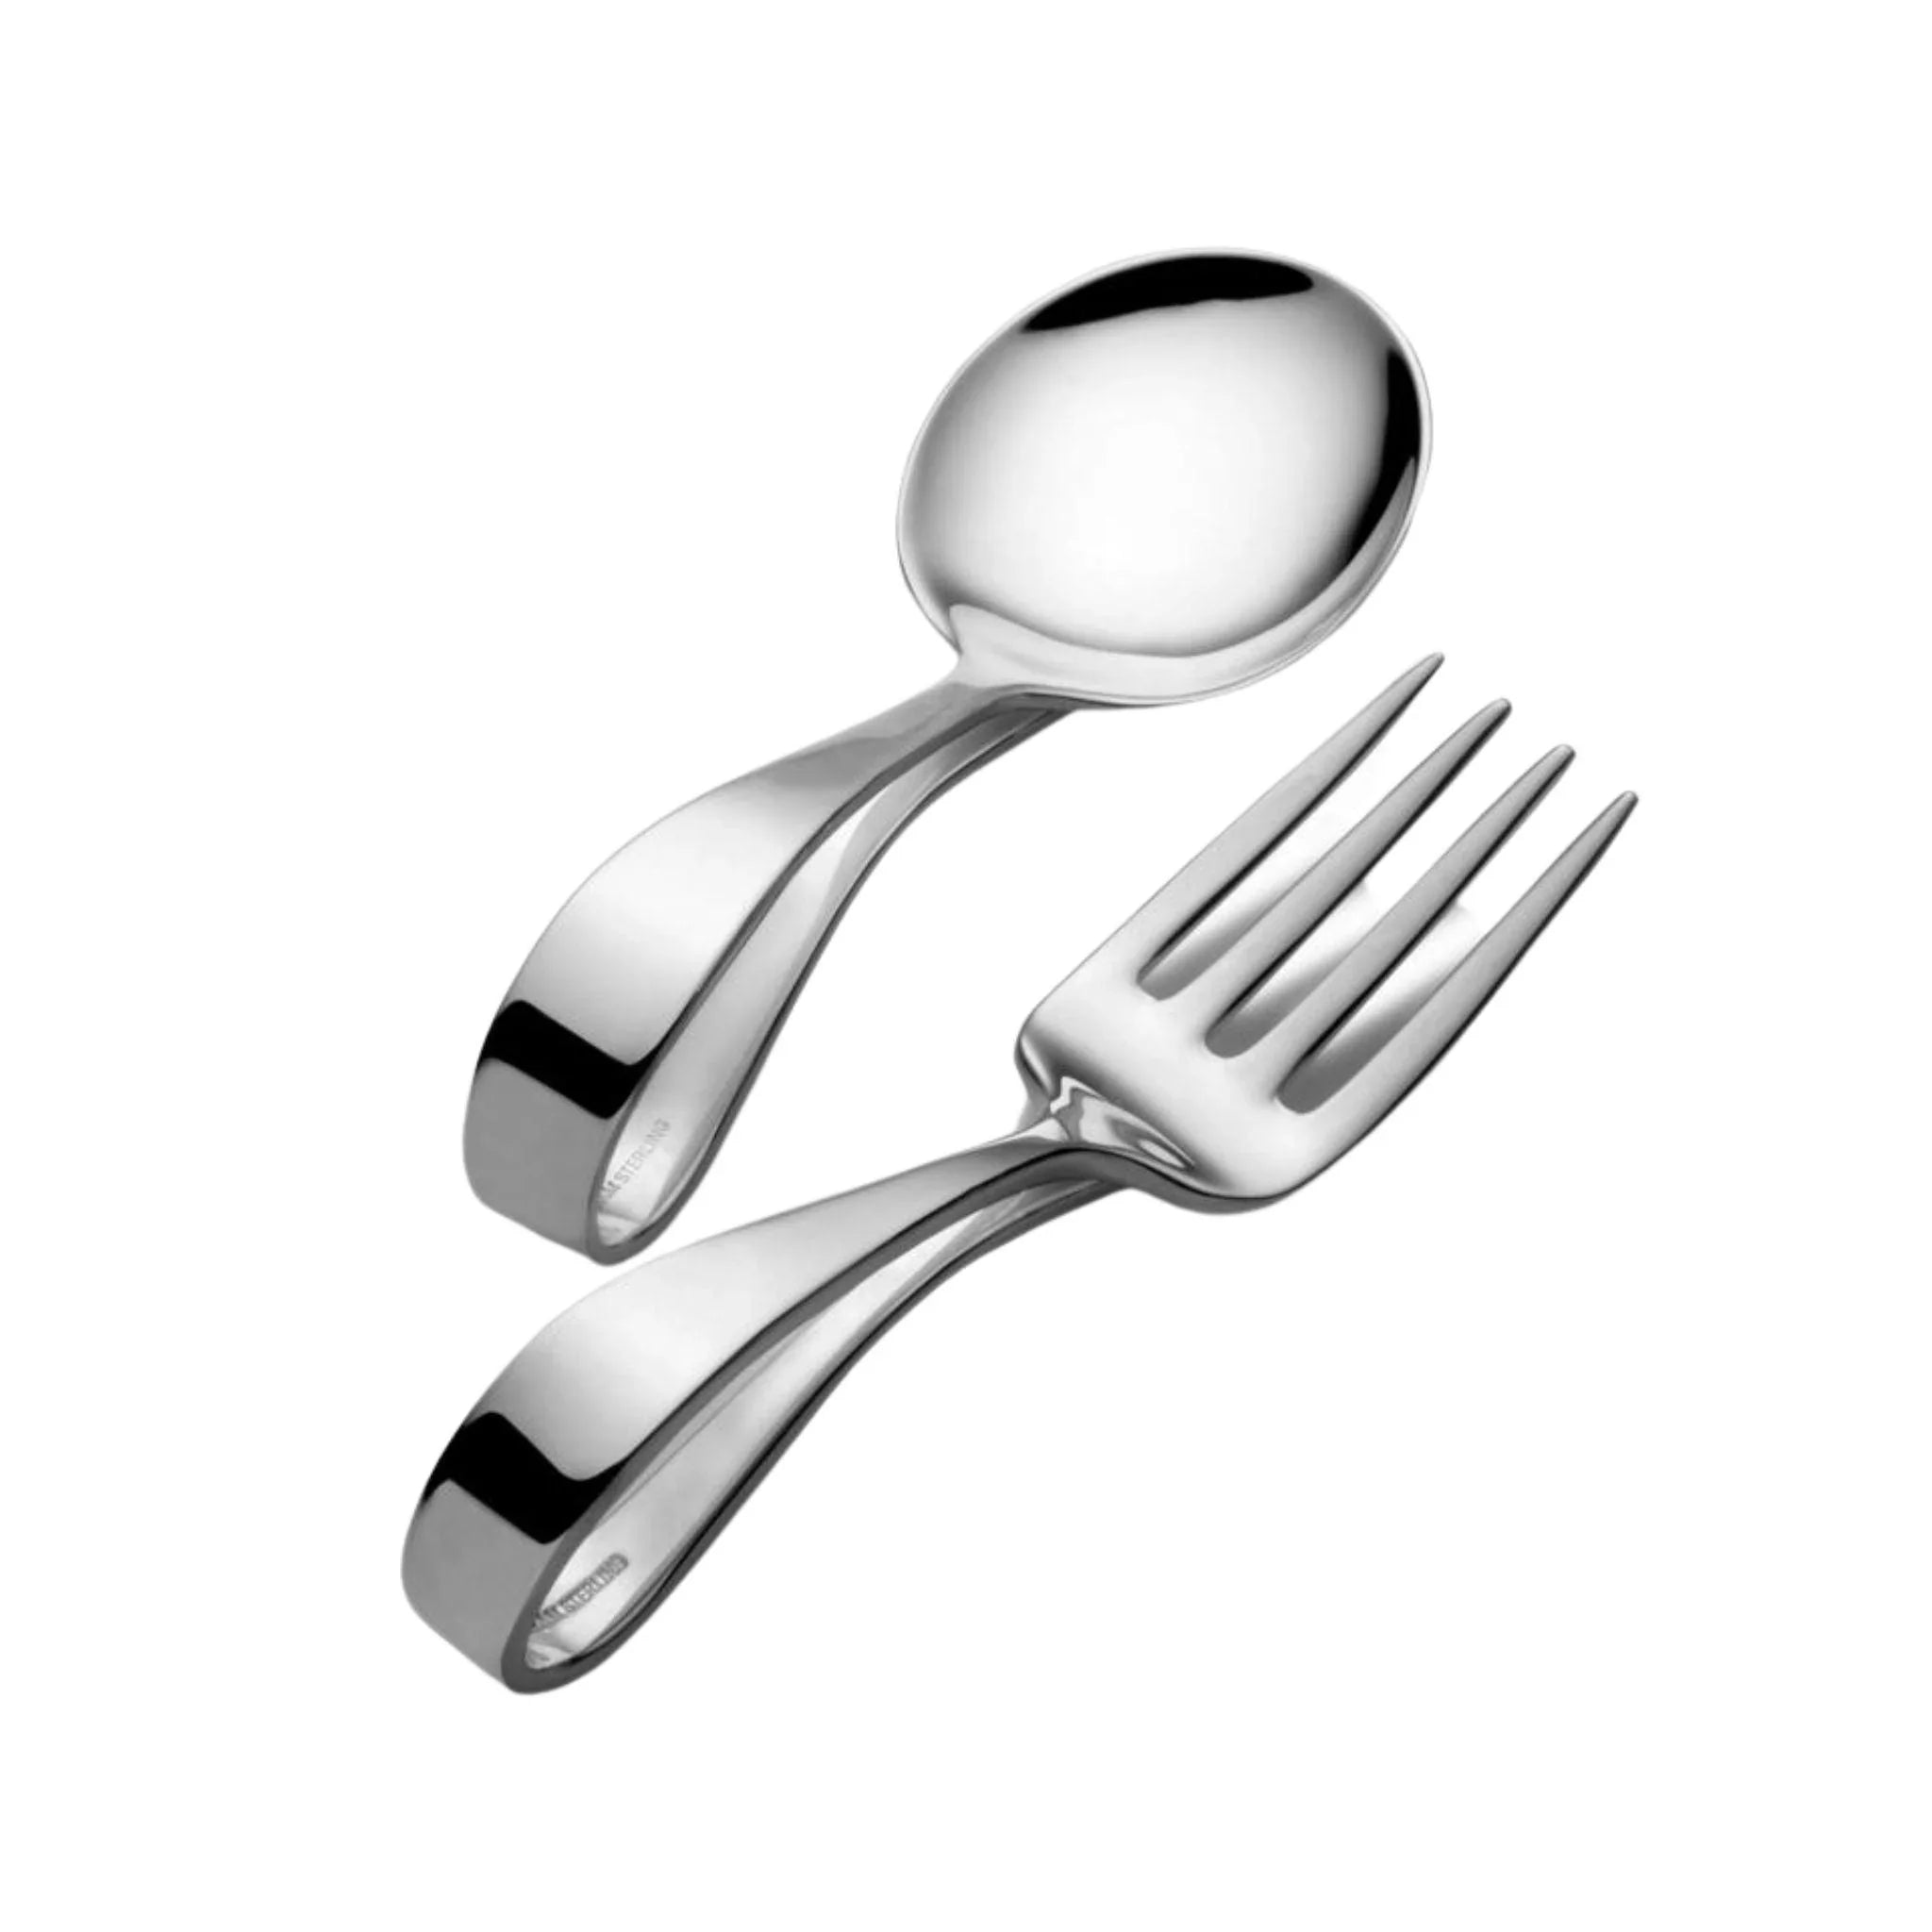 https://www.wellappointedhouse.com/cdn/shop/files/loop-handle-two-piece-sterling-silver-fork-and-spoon-baby-set-baby-gifts-the-well-appointed-house_df6a5fa7-0964-42a3-864c-af22bd34abdb.webp?v=1691689266